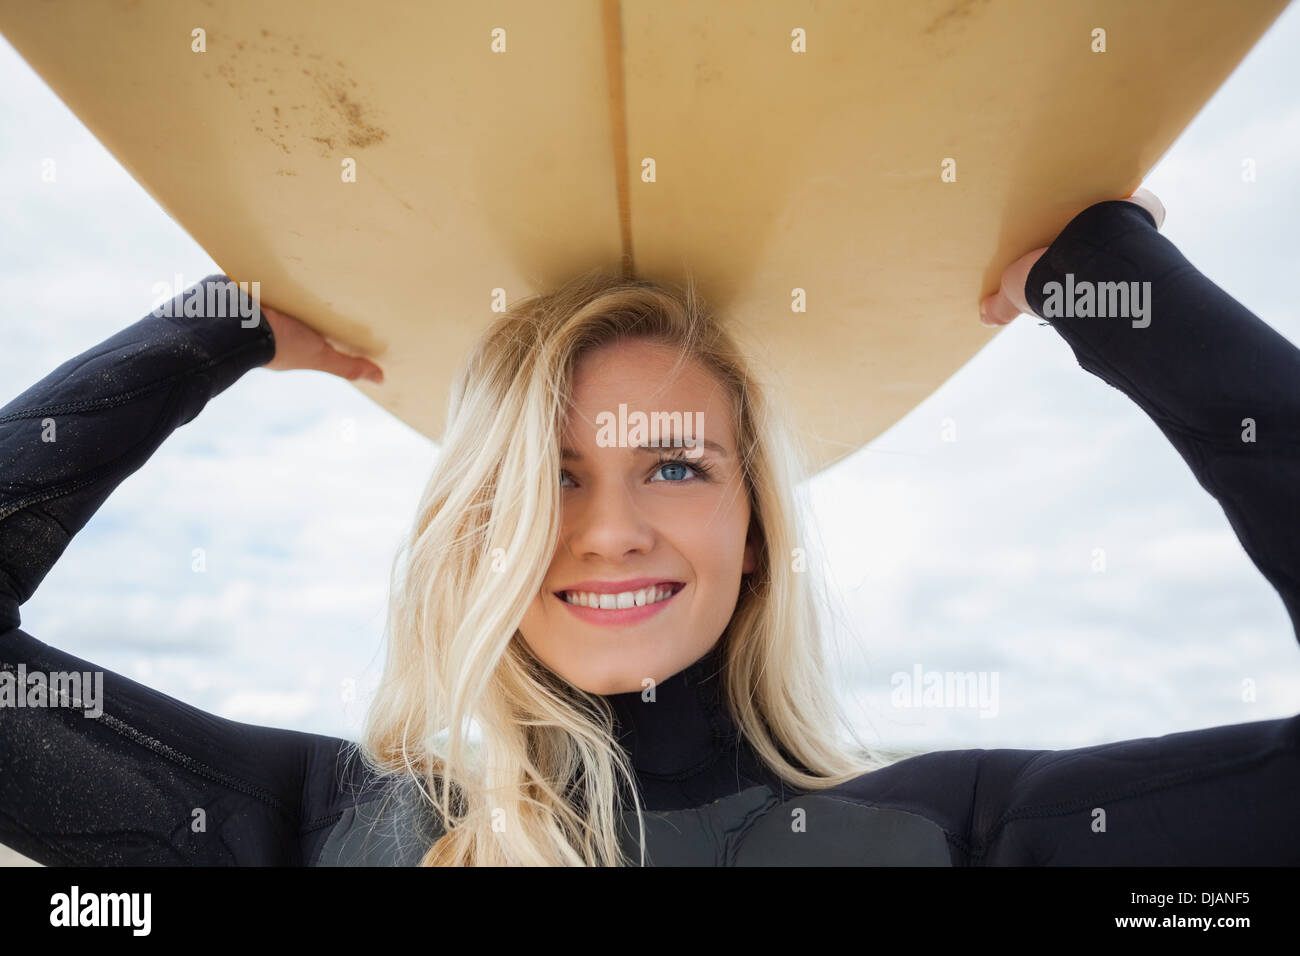 Smiling woman in wet suit holding surfboard over head Stock Photo